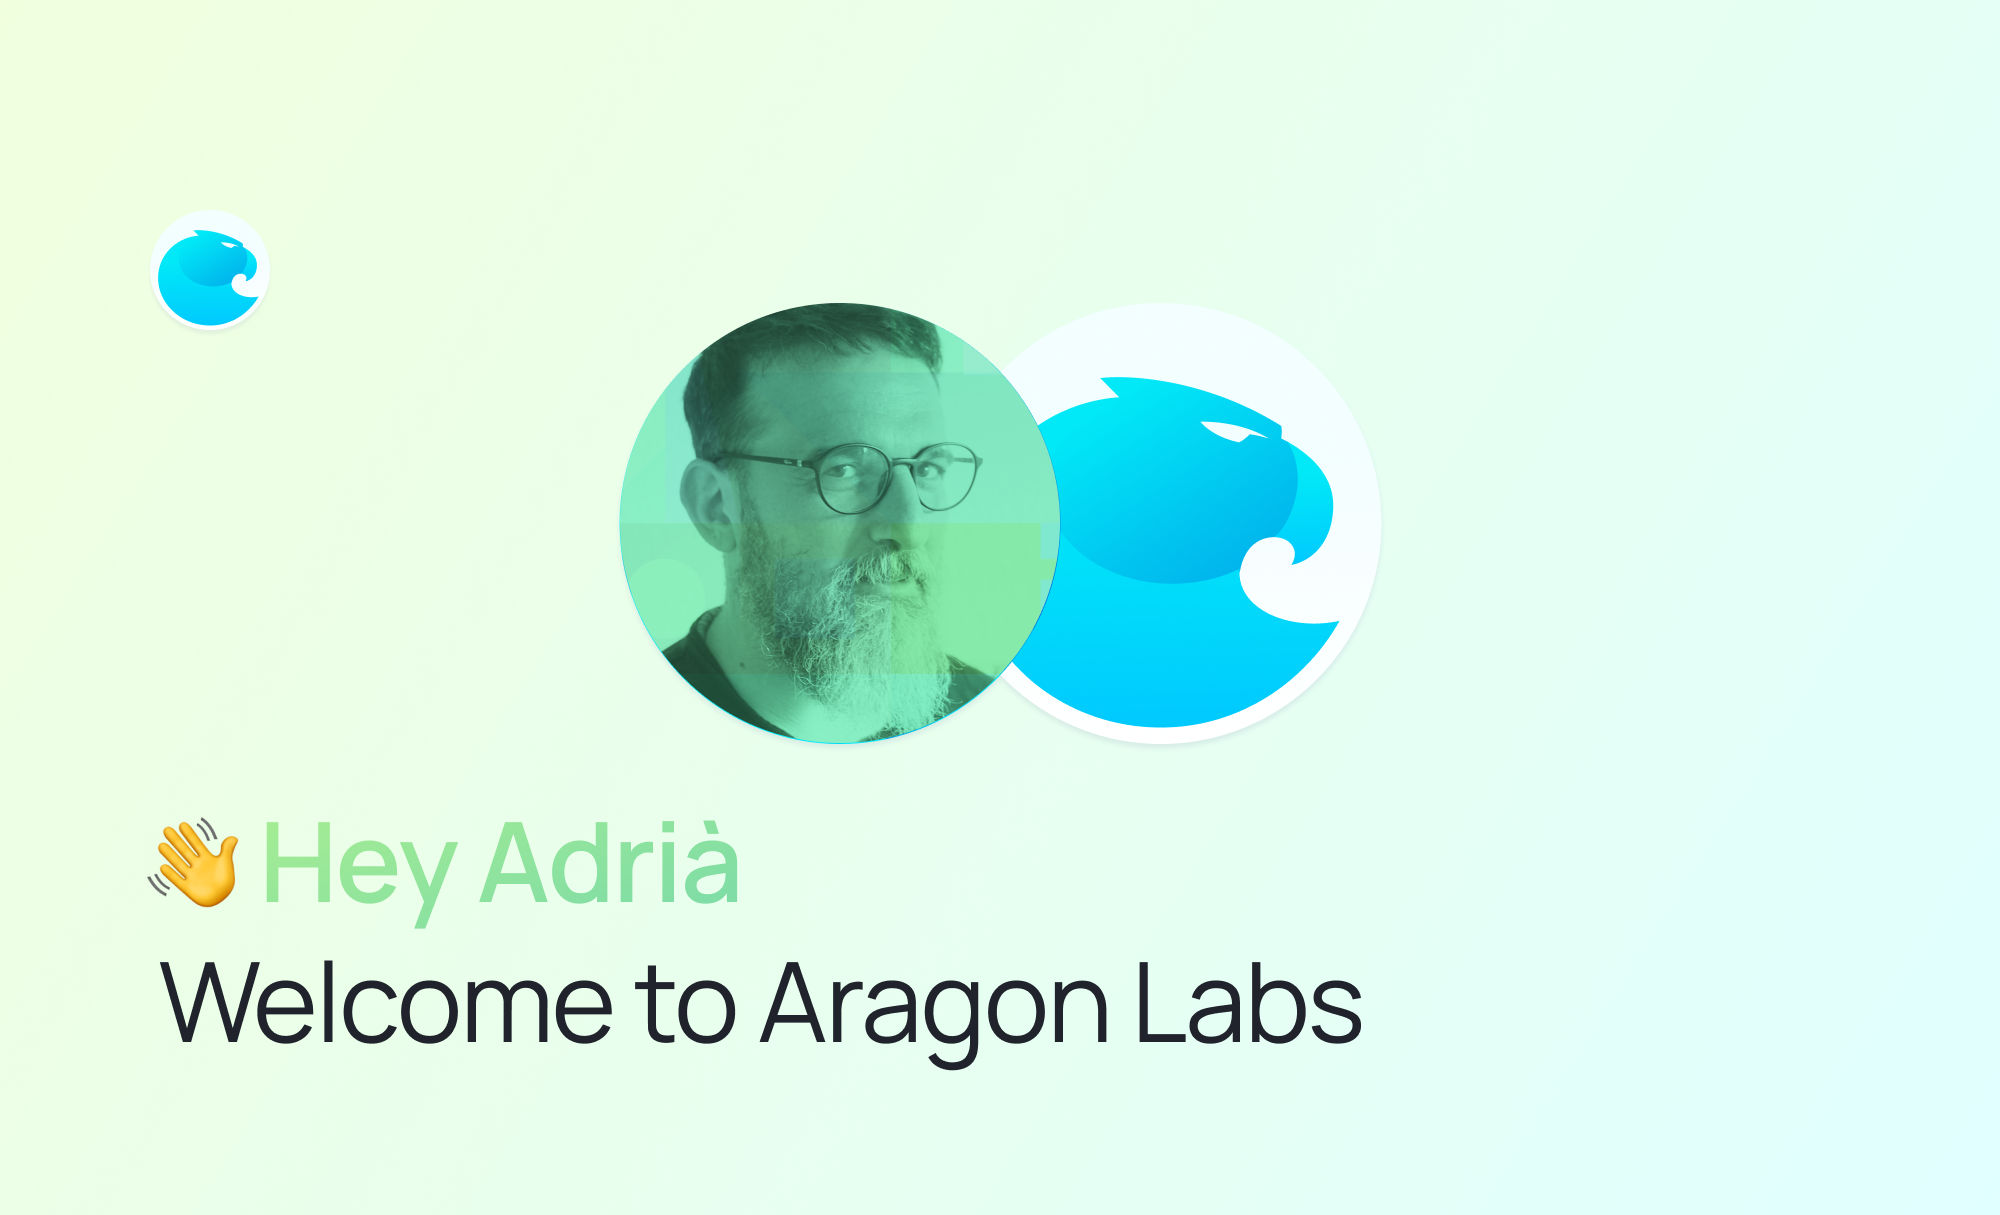 Welcoming Adrià Massanet as Security Engineer at Aragon Labs